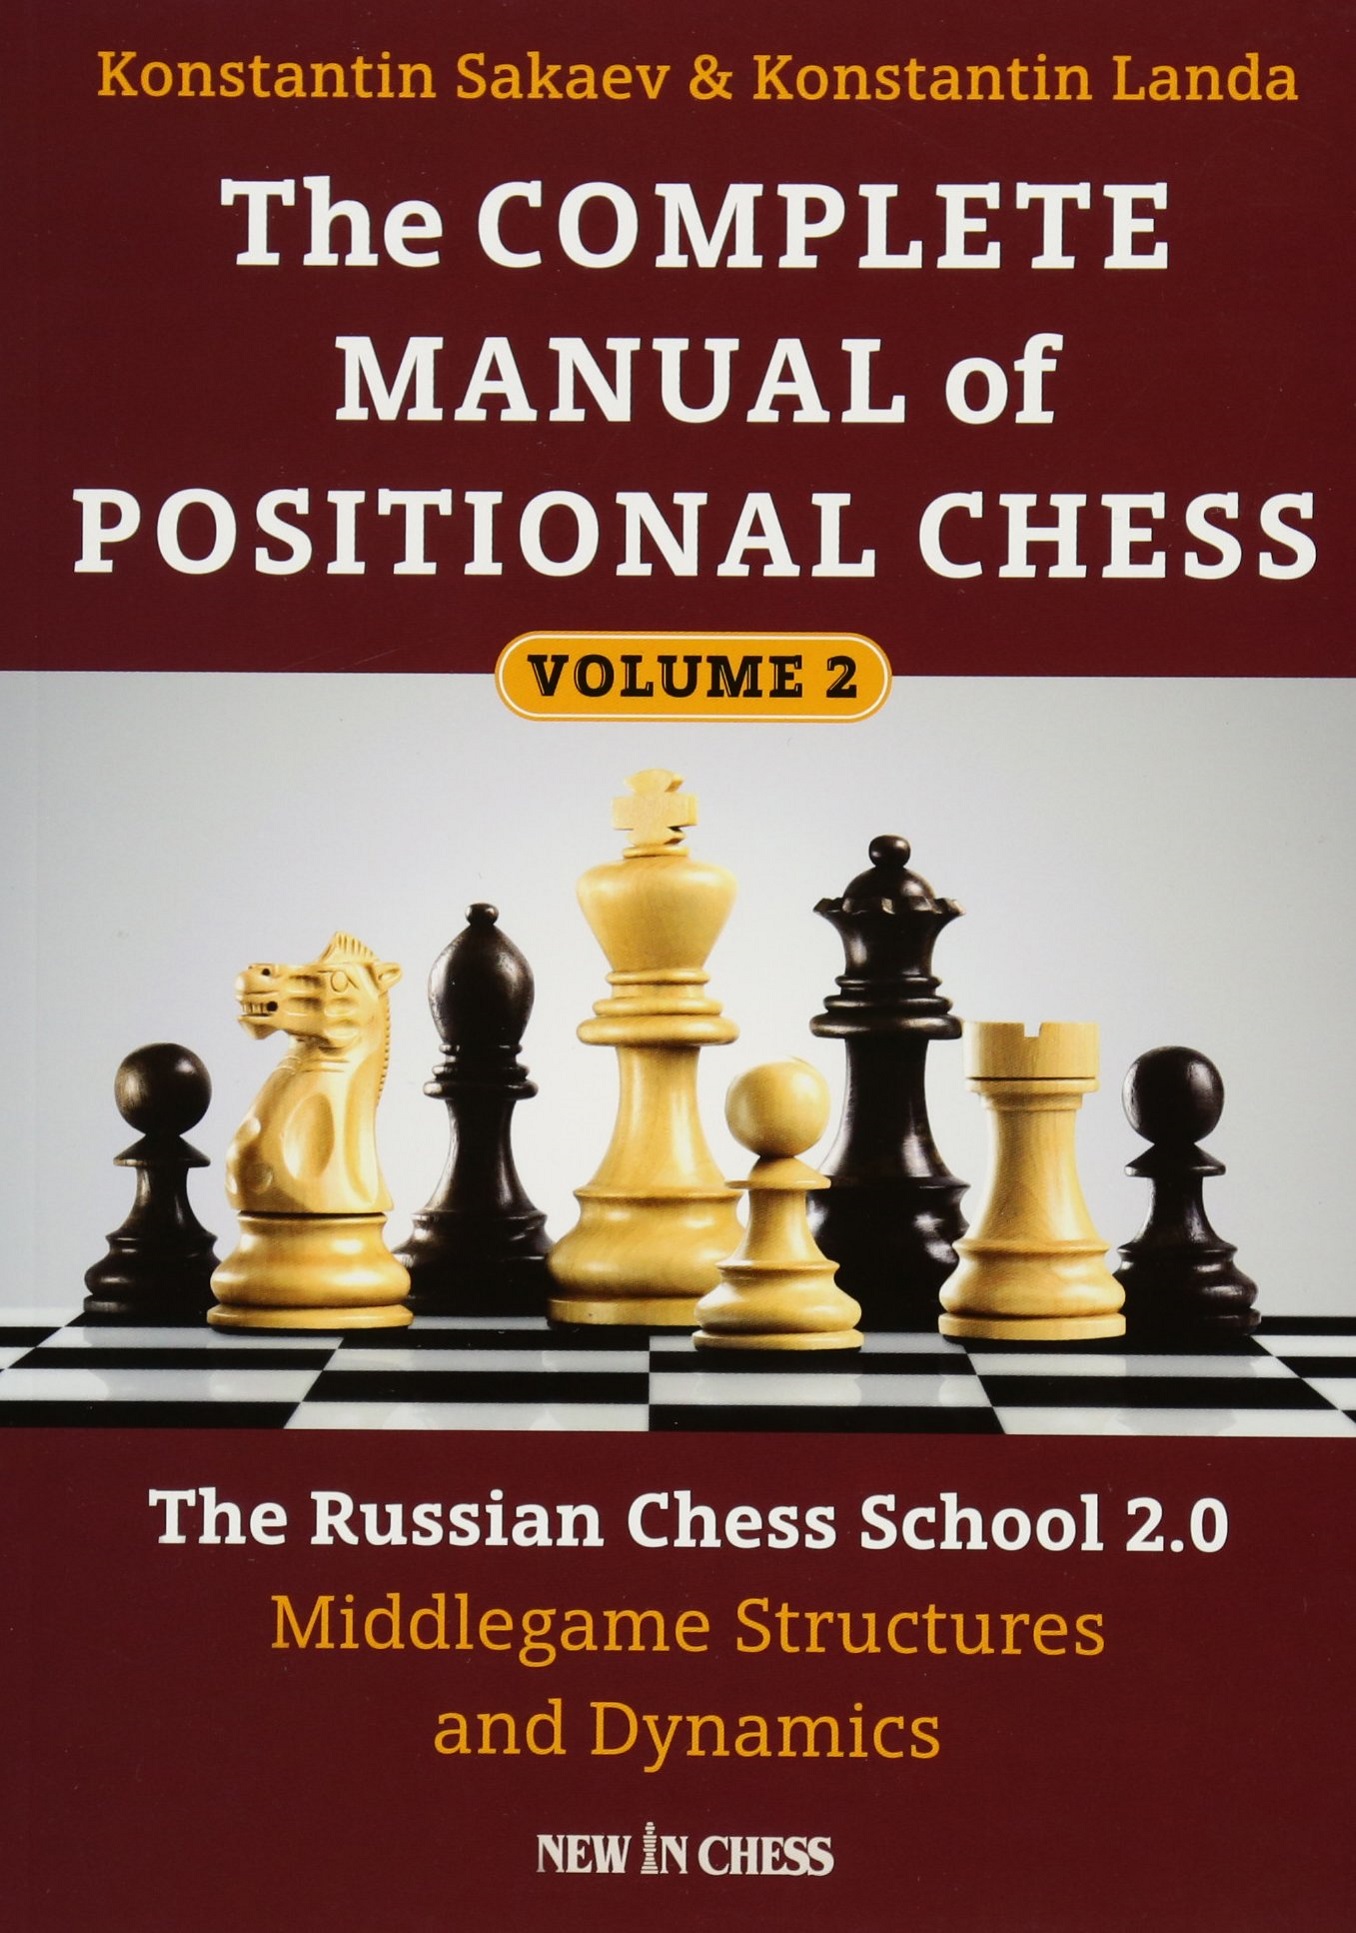 The Complete Manual of Positional Chess. Volume 2: The Russian Chess School 2.0. 9789056917425